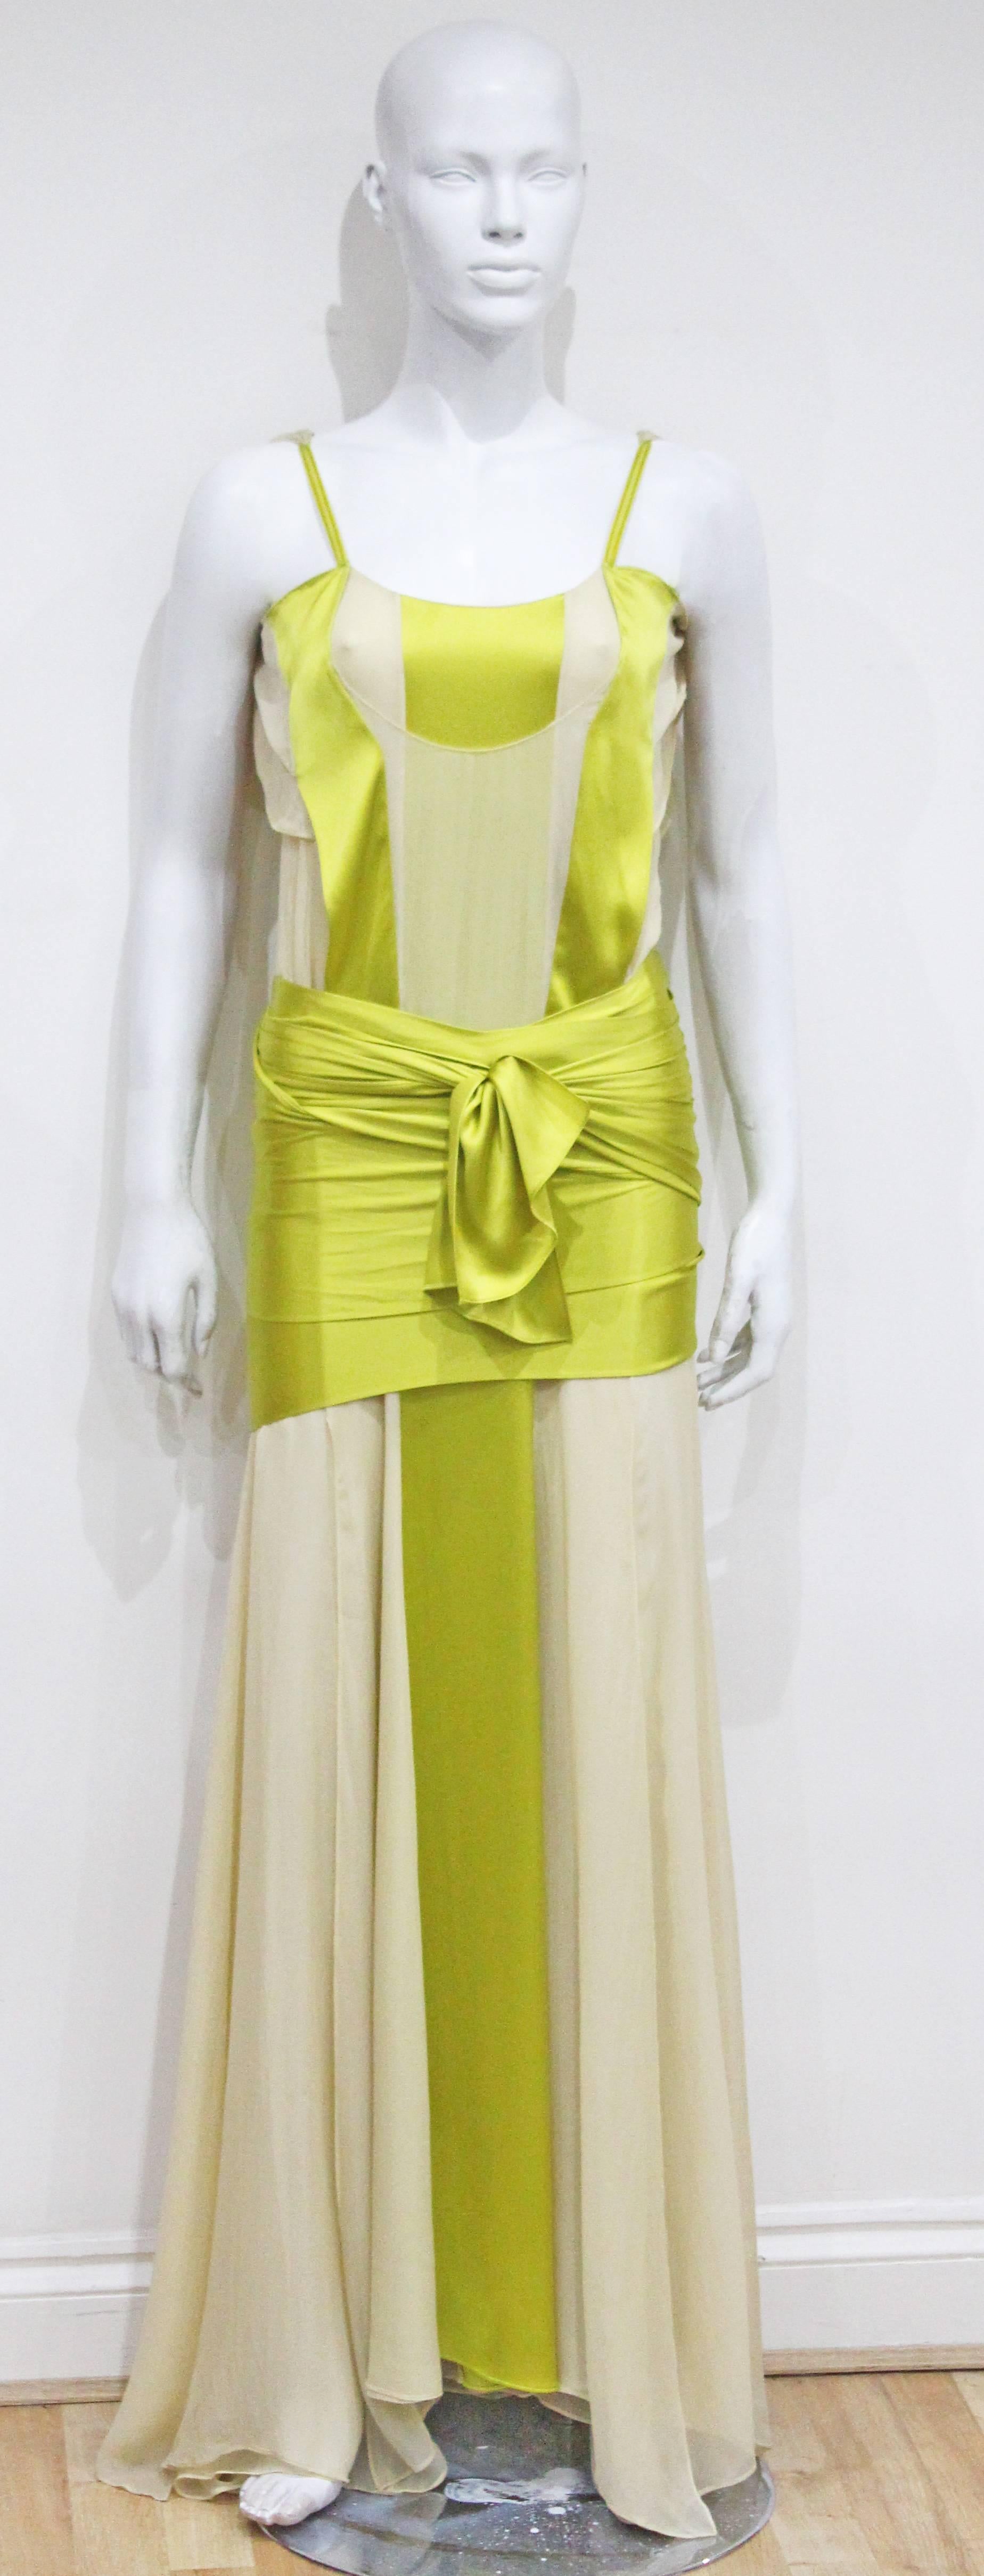 A Yves Saint Laurent by Tom Ford evening dress from the Spring/Summer 2004 runway collection. The dress is in a Grecian style with extra long silk sashes which tie around the lower waist. This particular dress was highly documented at the time and